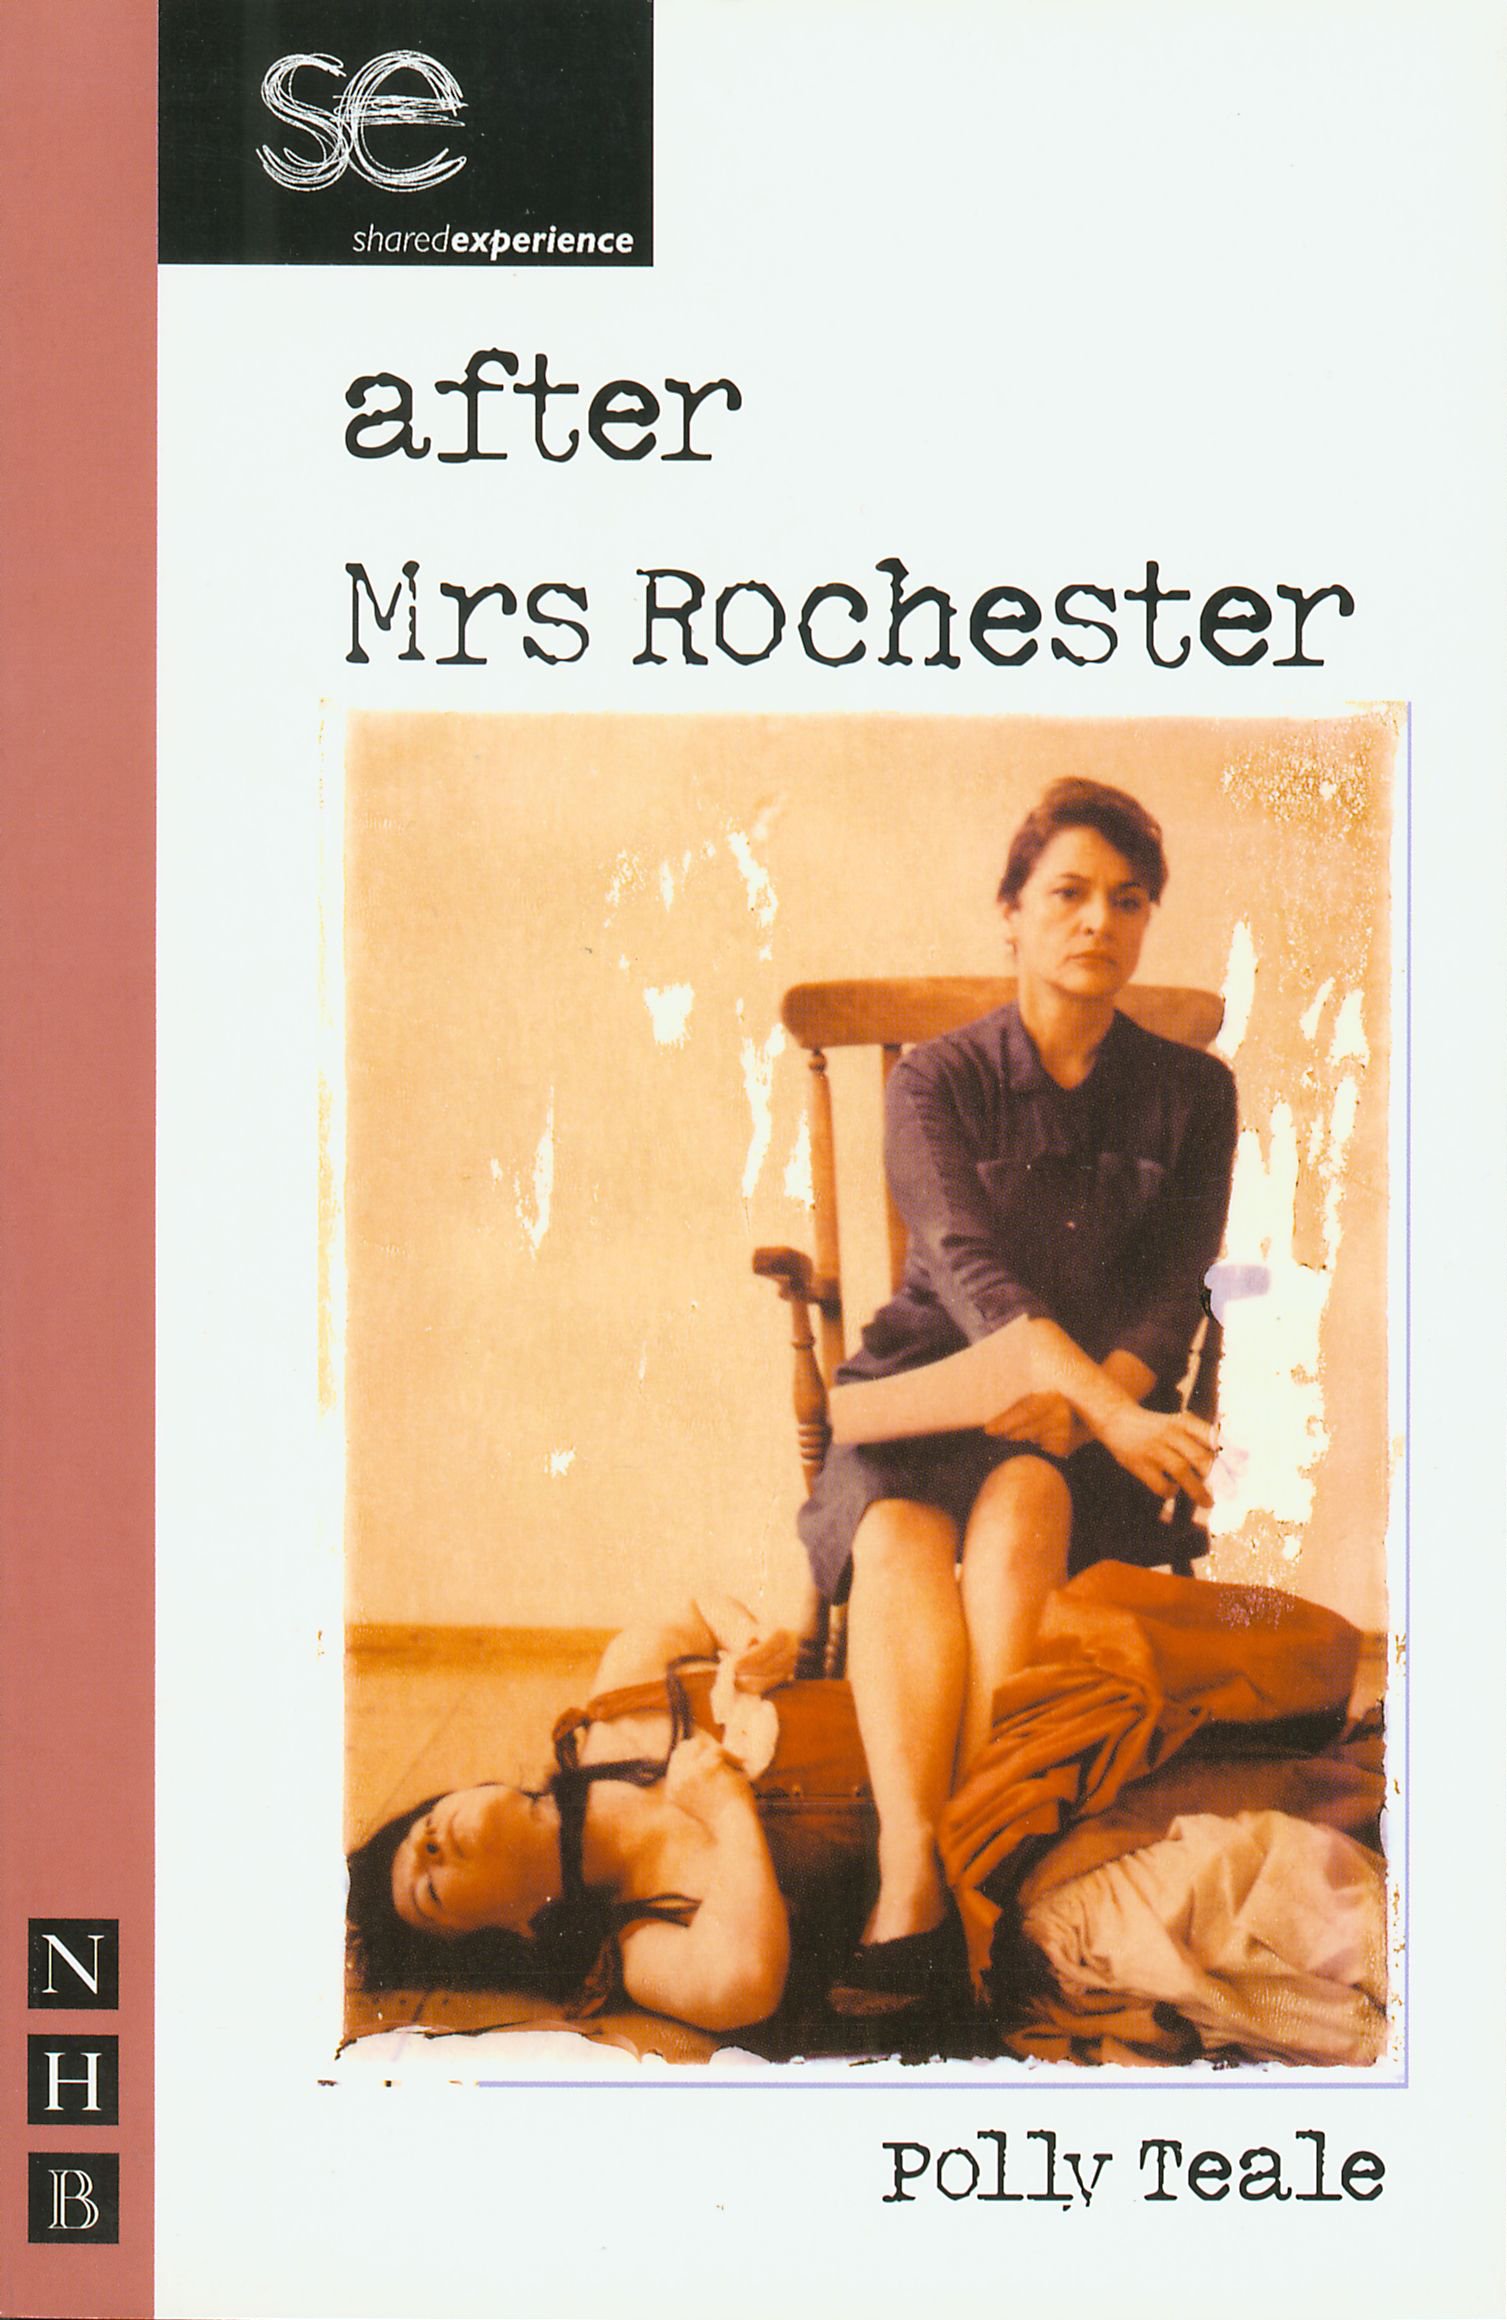 After Mrs Rochester by Polly Teale & Good Morning Midnight by Jean Rhys